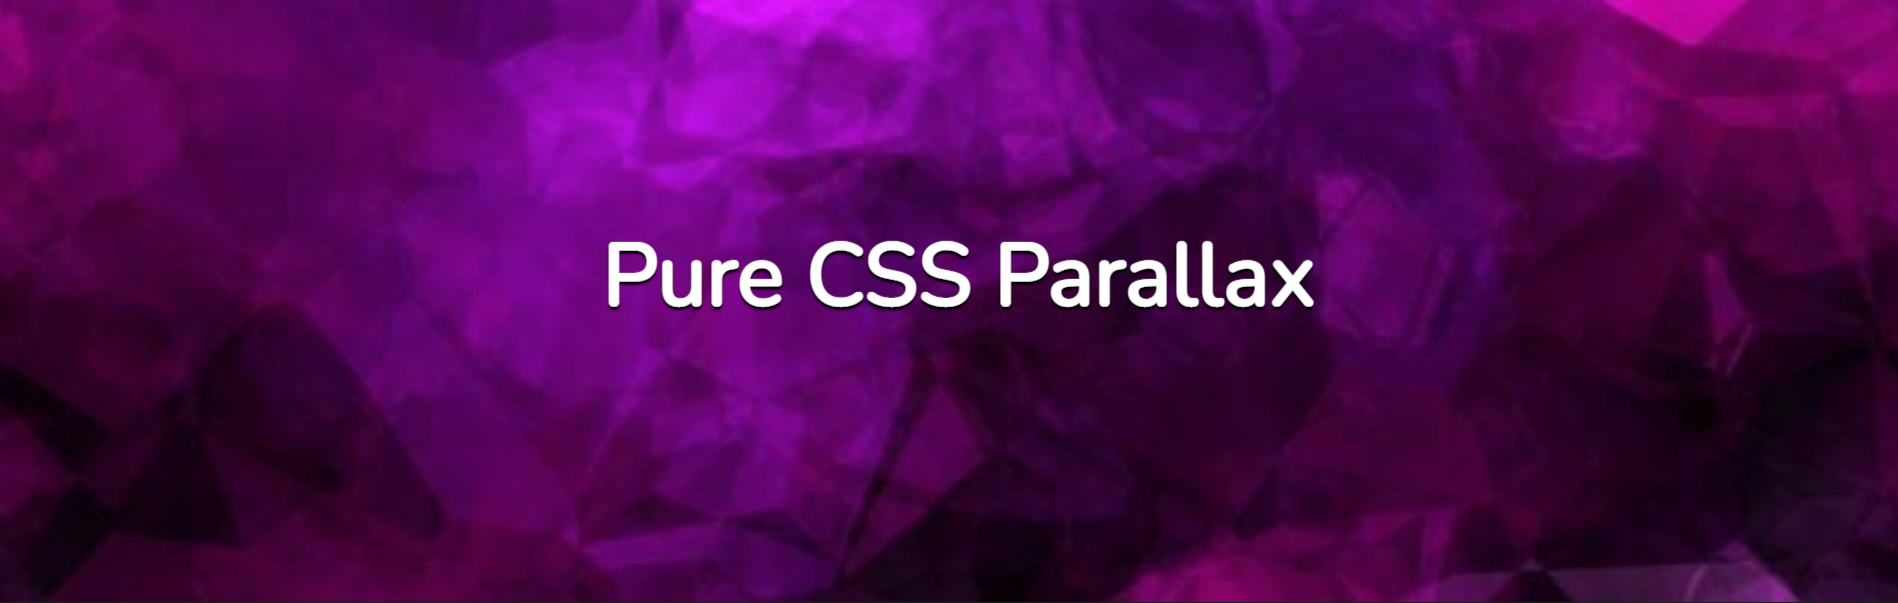 Pure CSS Parallax Scrolling